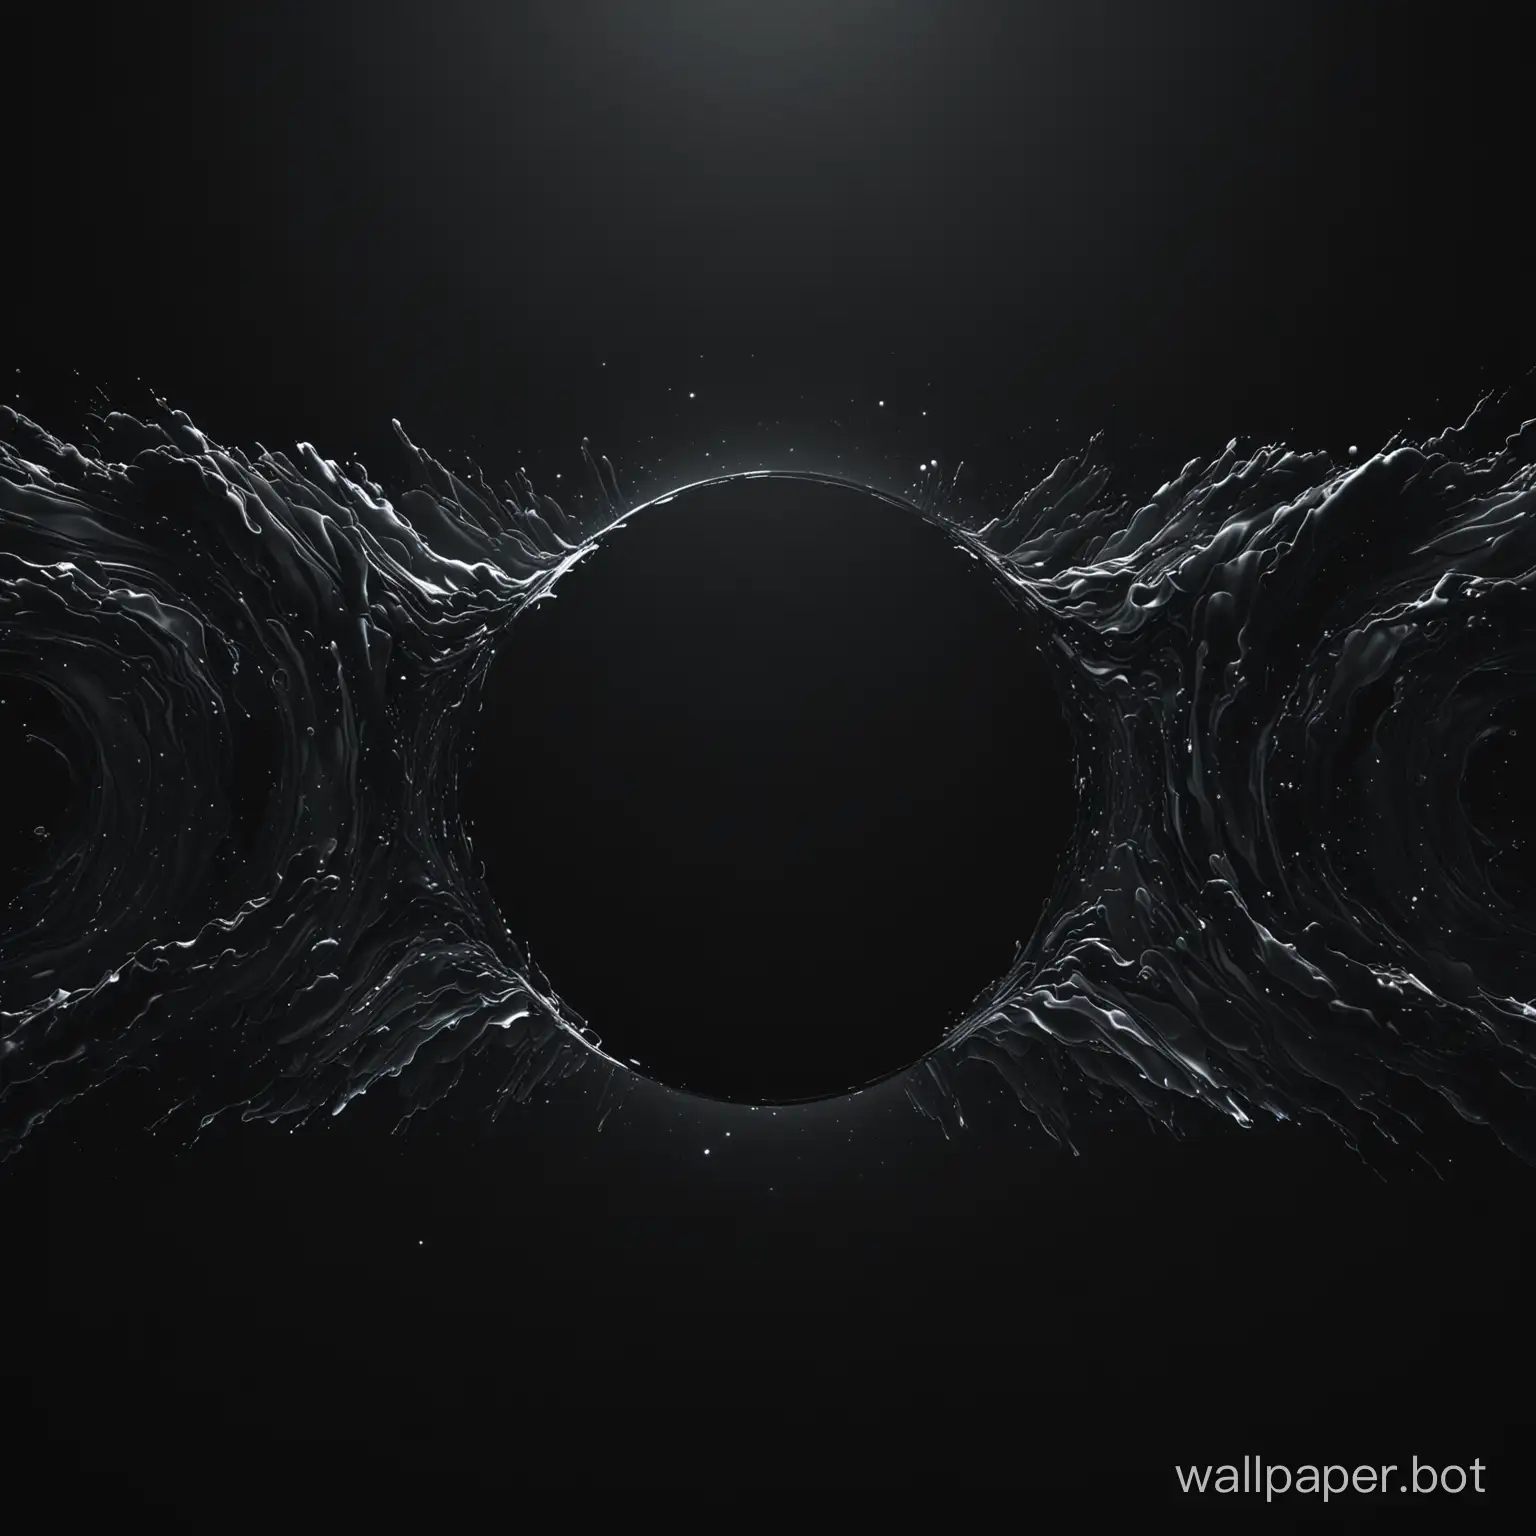 dark abstract for OLED display with 6720 x 2560 resolution